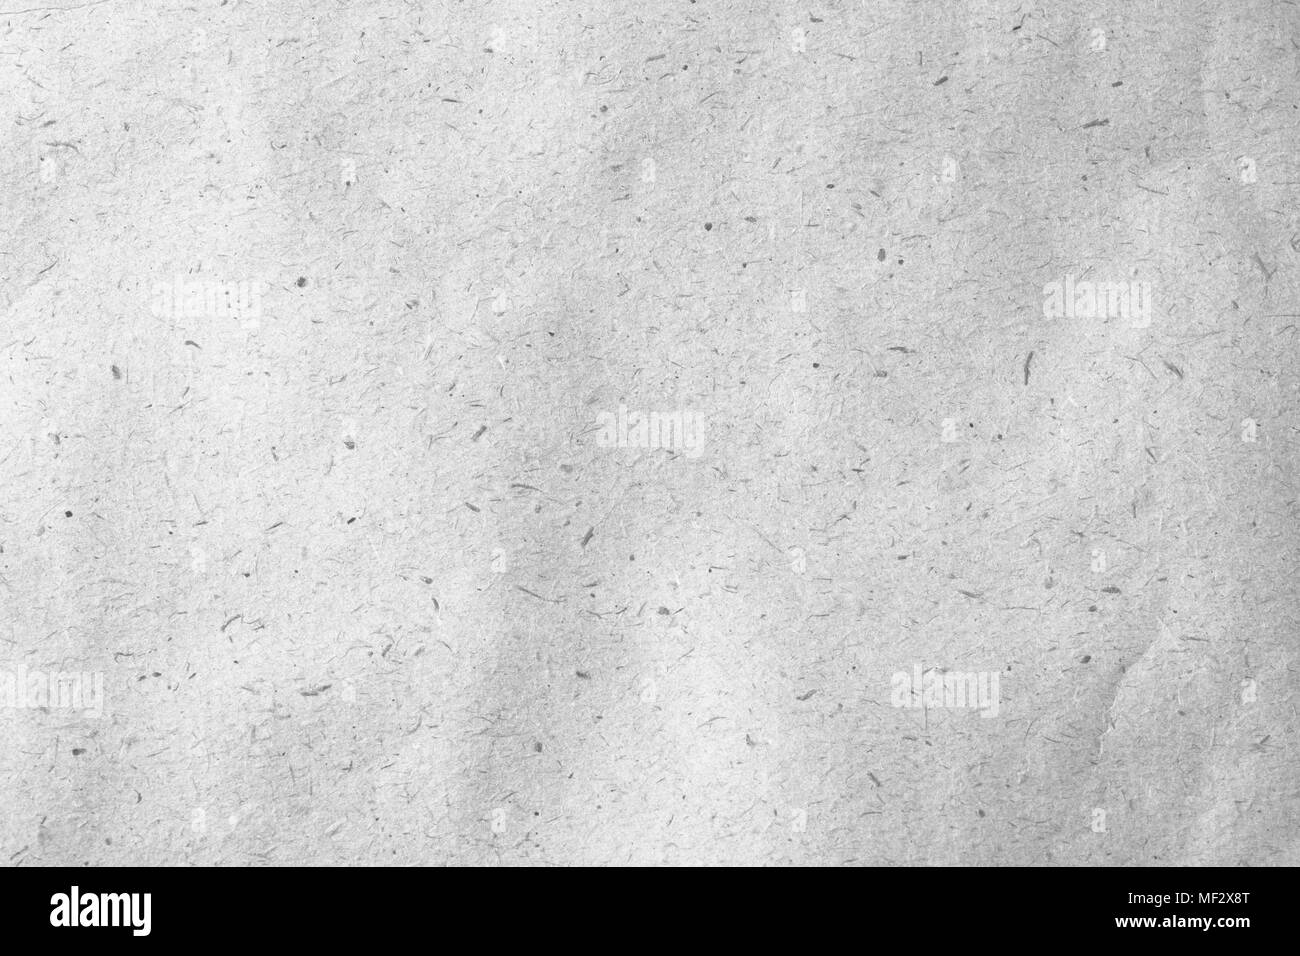 Wrapping paper texture for overlay artwork. Grunge effect background Stock Photo